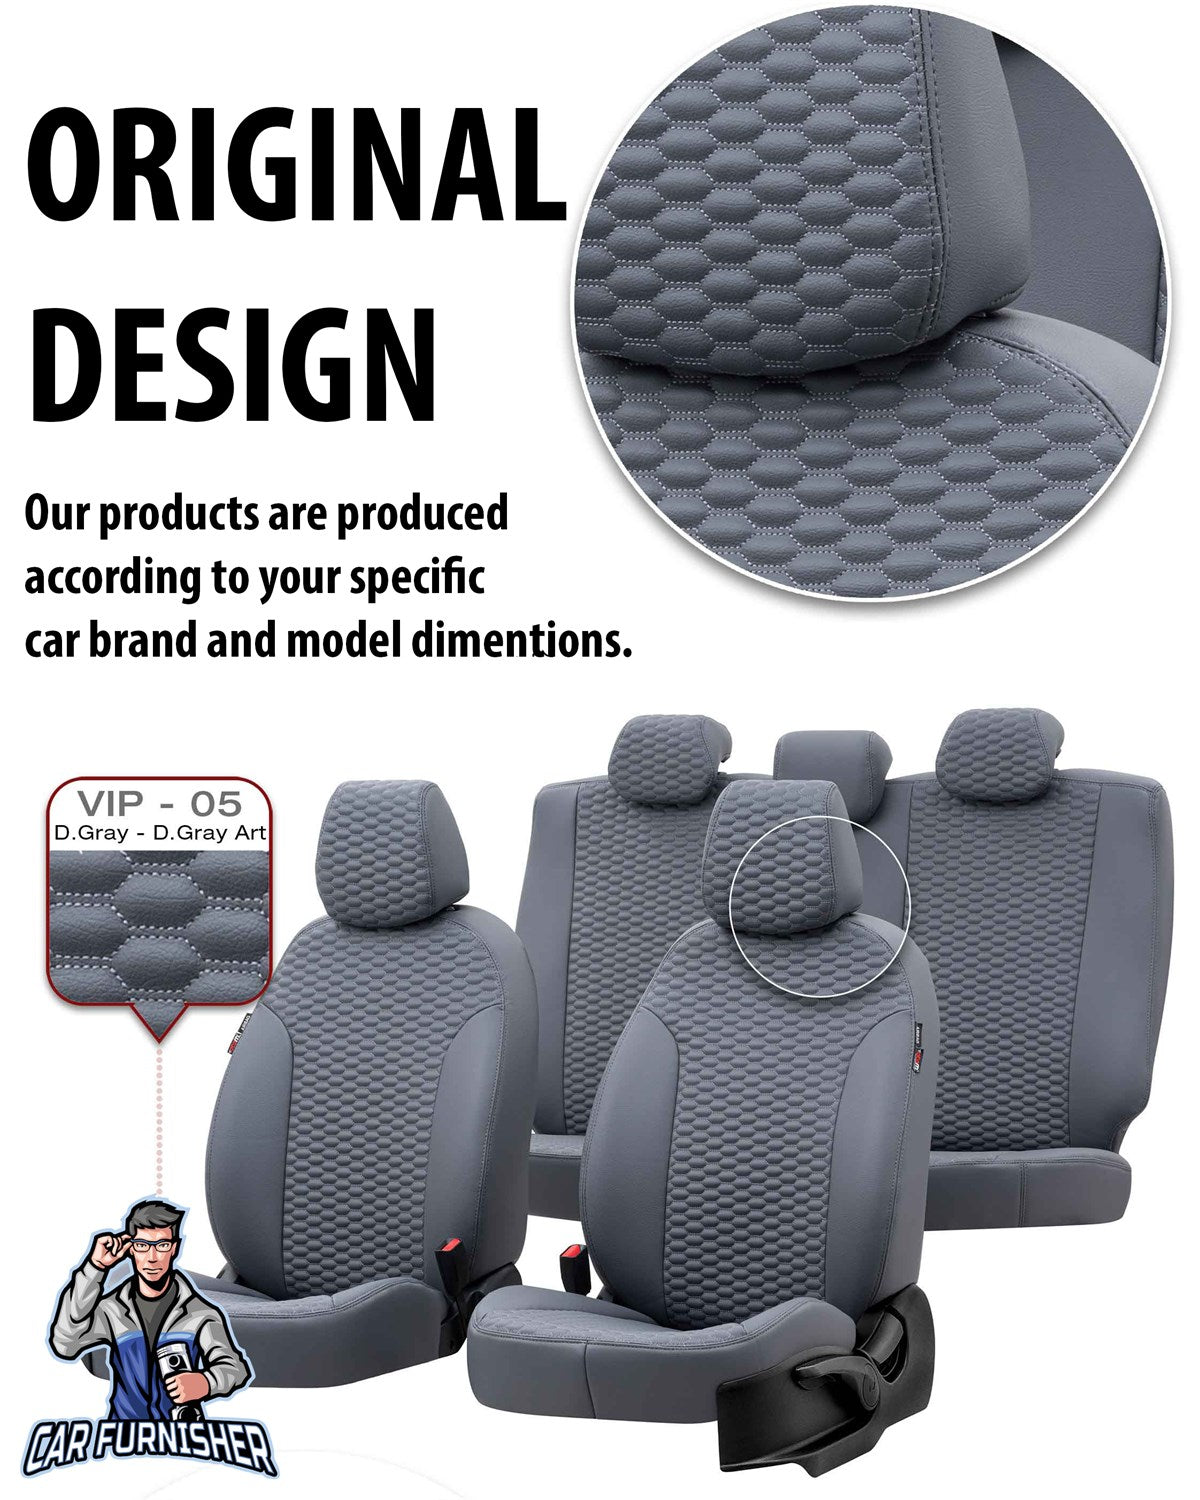 Renault Modus Seat Covers Tokyo Leather Design Black Leather